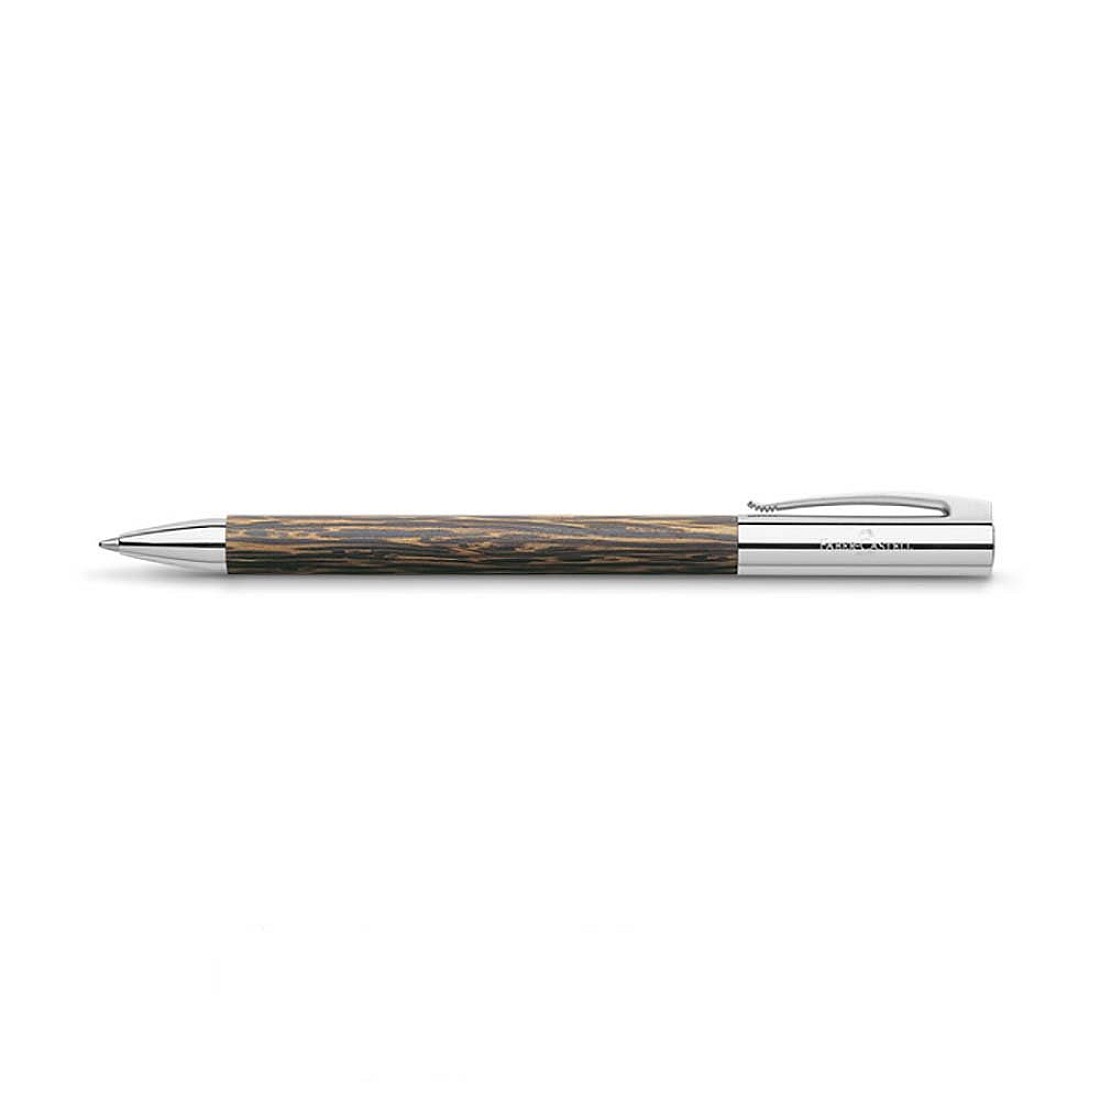 Faber-Castell Ambition Coconut Ballpoint